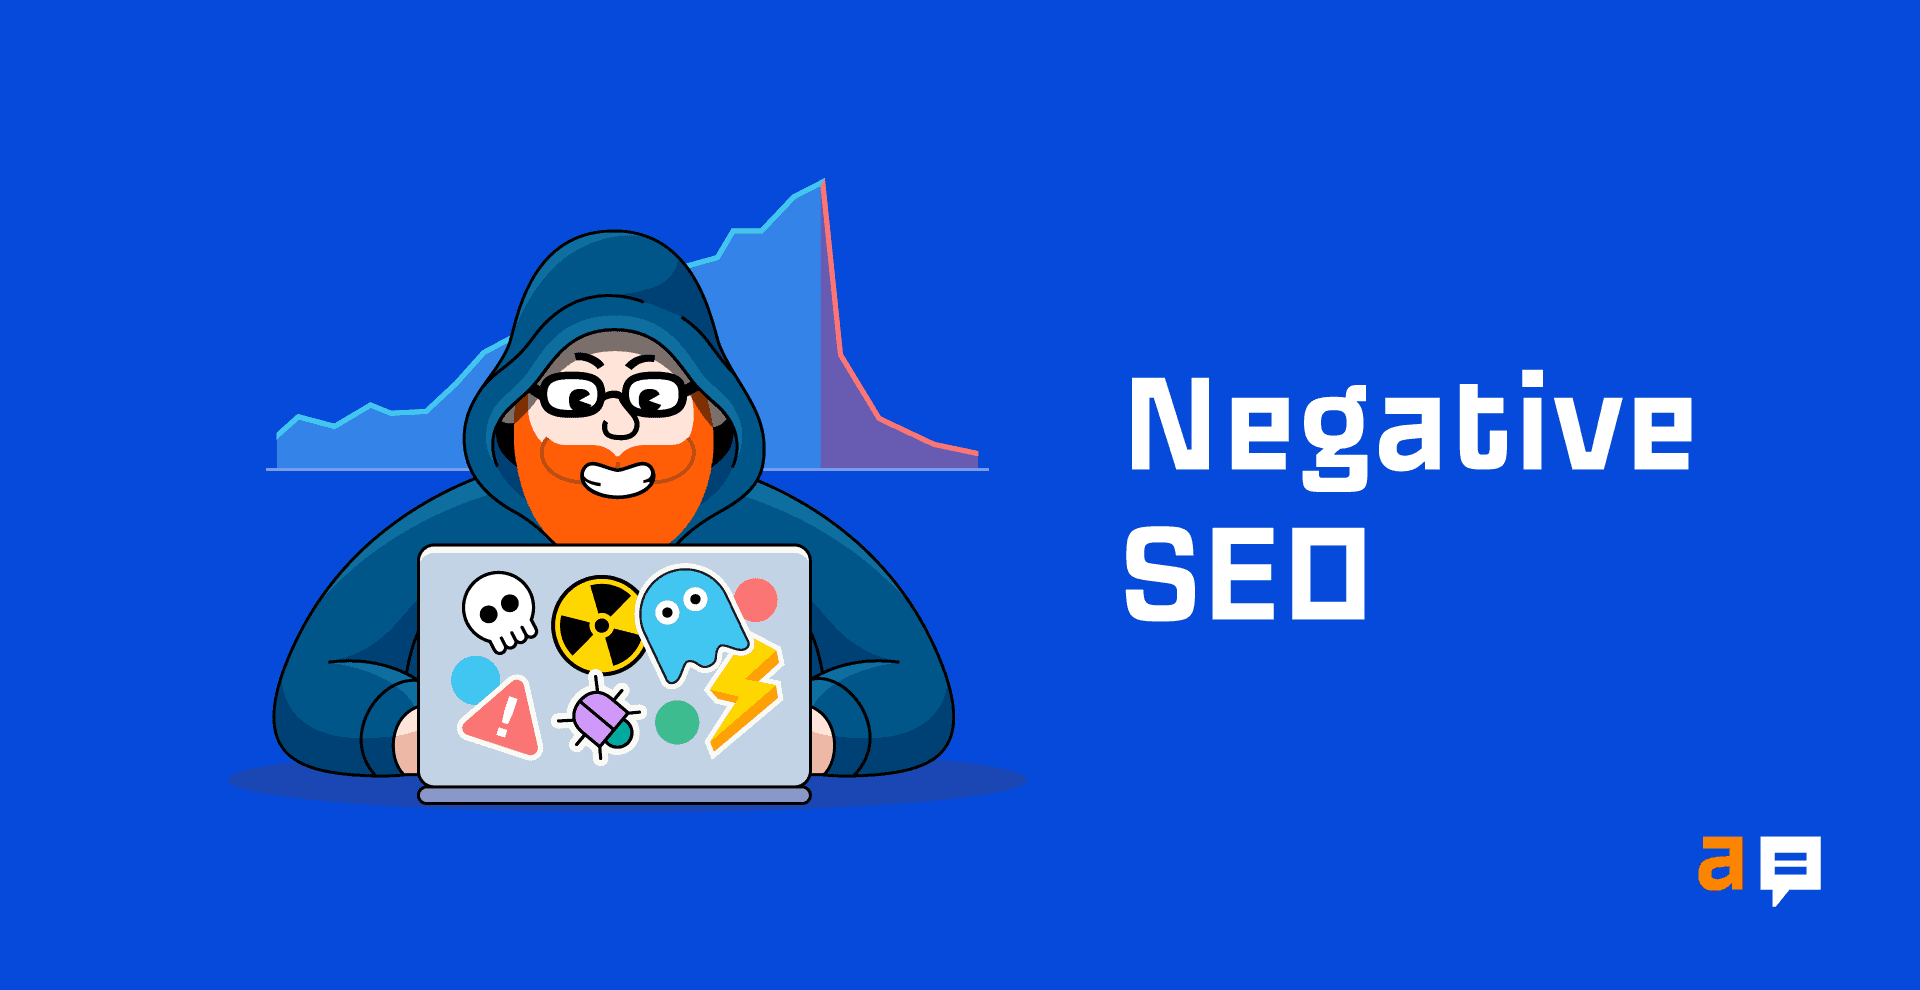 How to Detect (and Deflect) Negative SEO Attacks